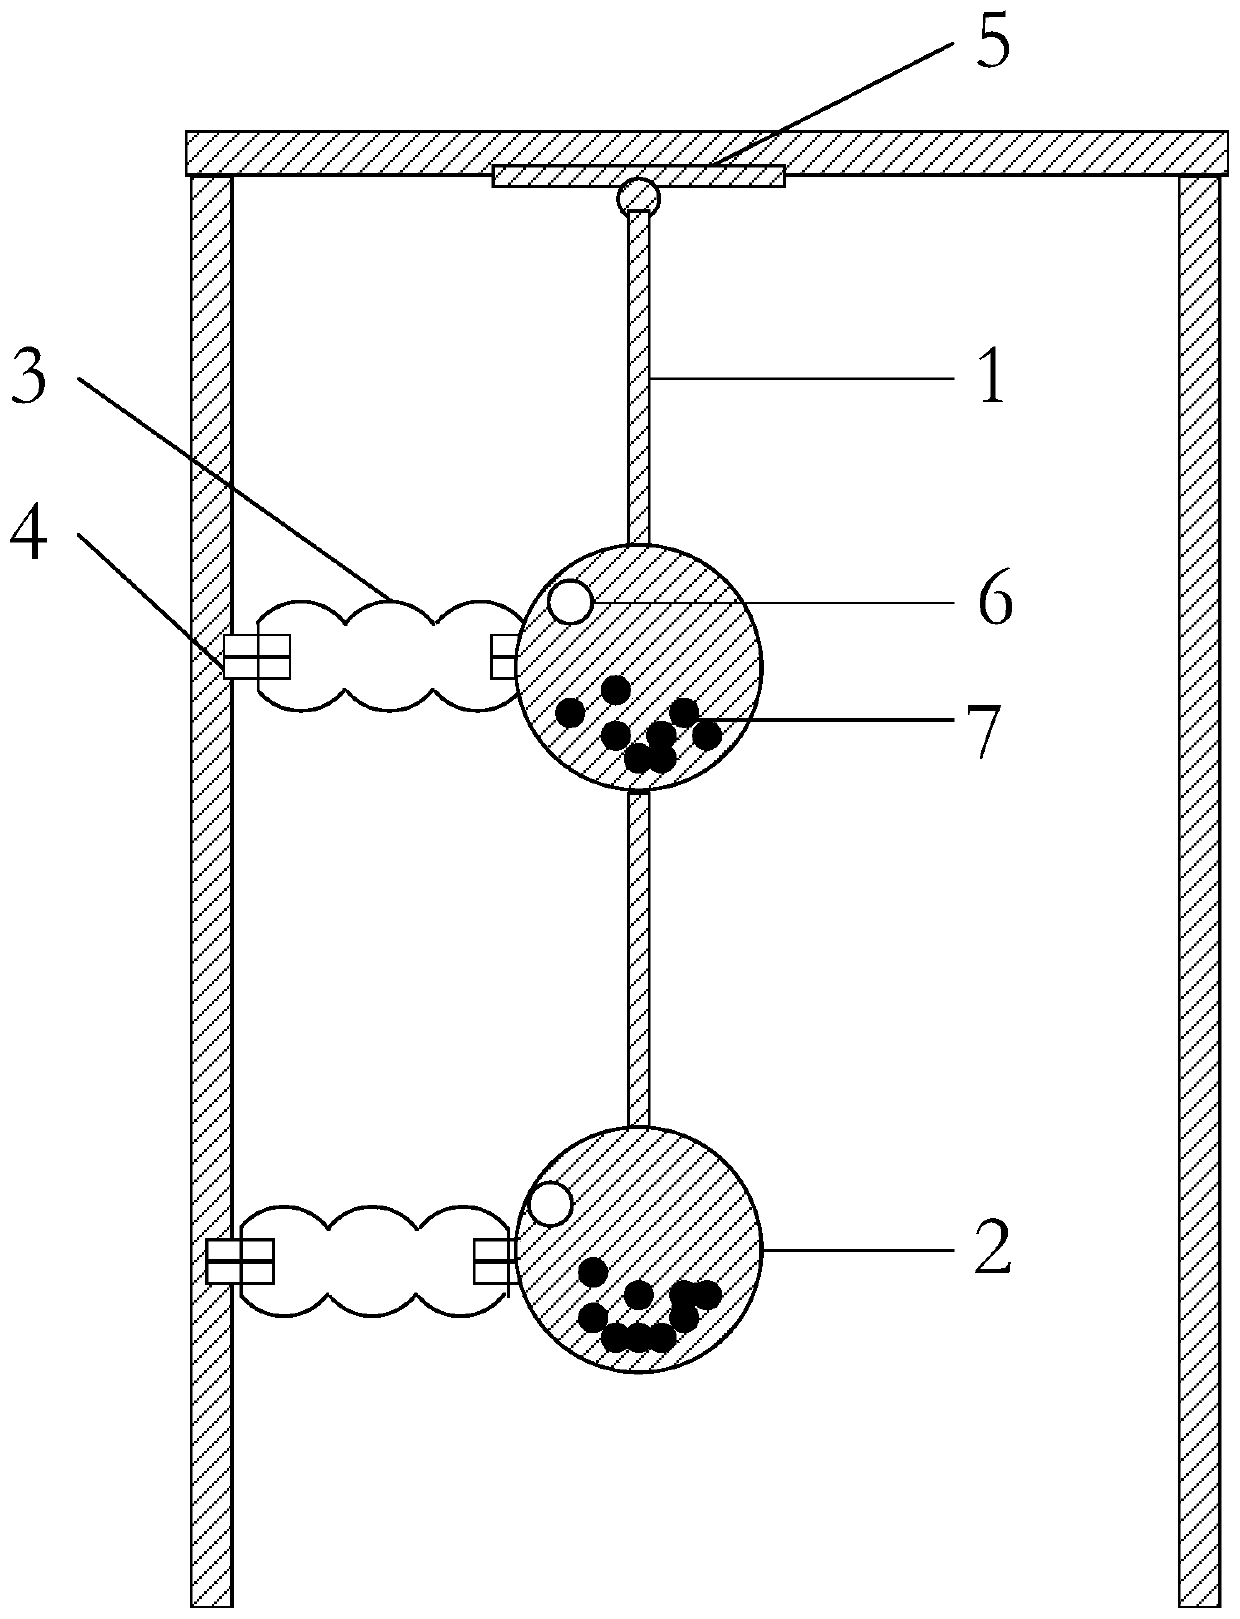 A mass-tuned vibration-damping multi-pendulum with air springs and damping particles